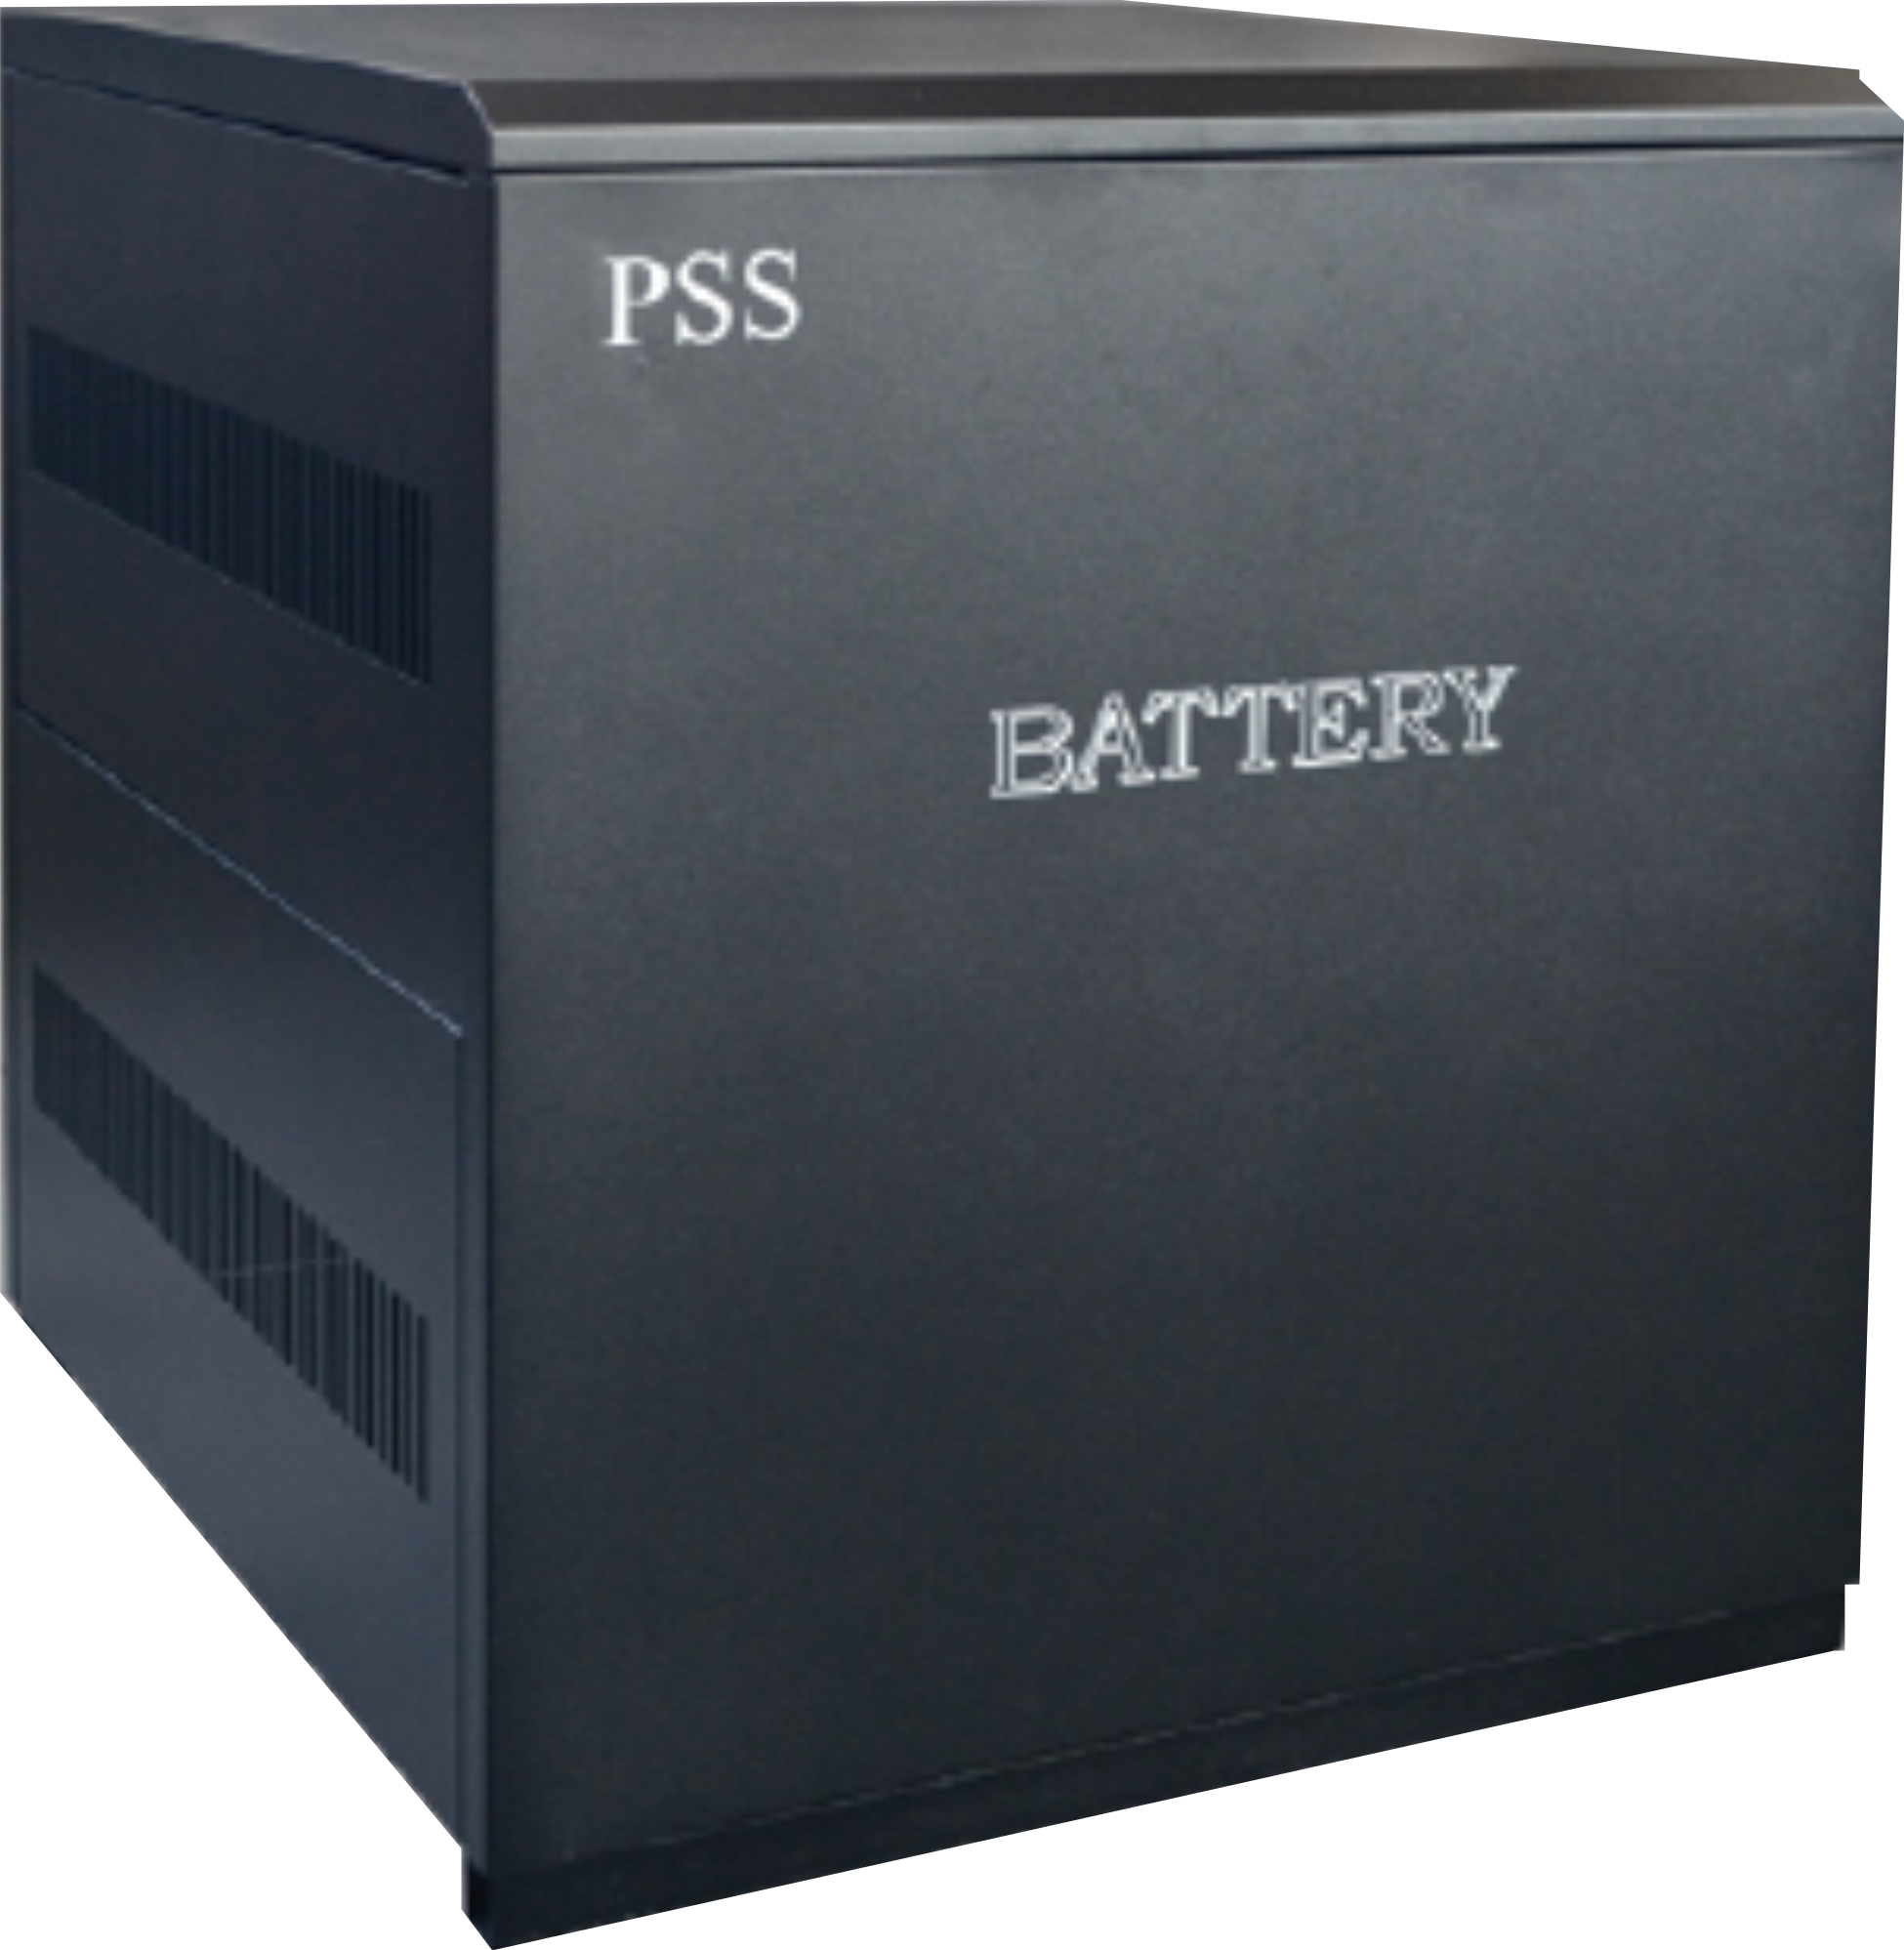 Battery Cabinet A1 – PSS